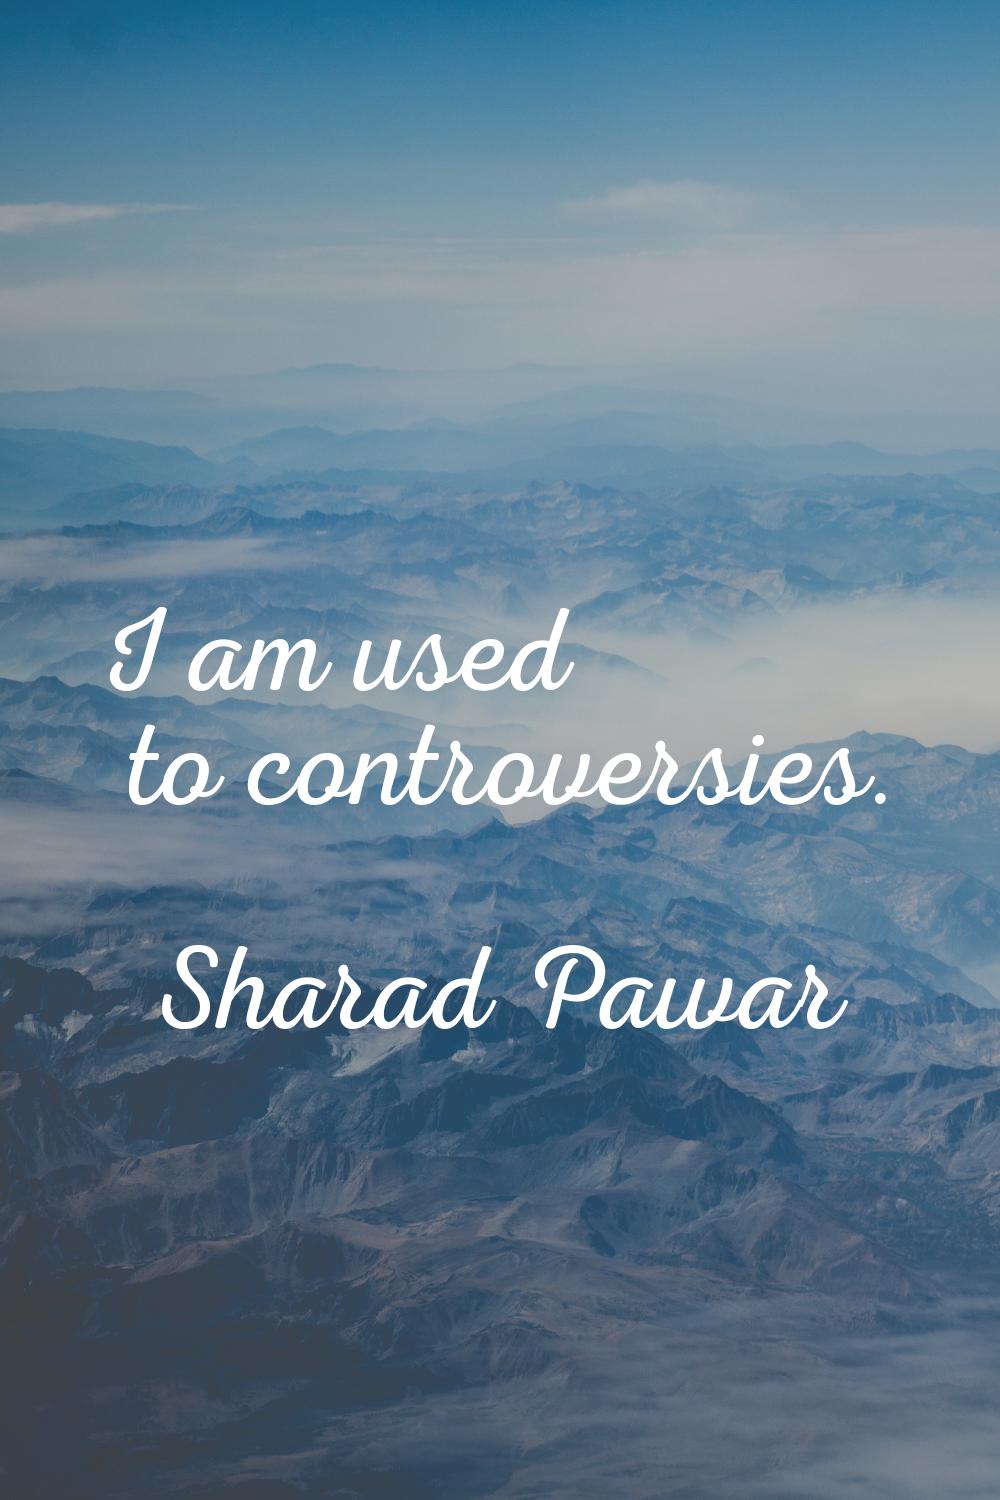 I am used to controversies.